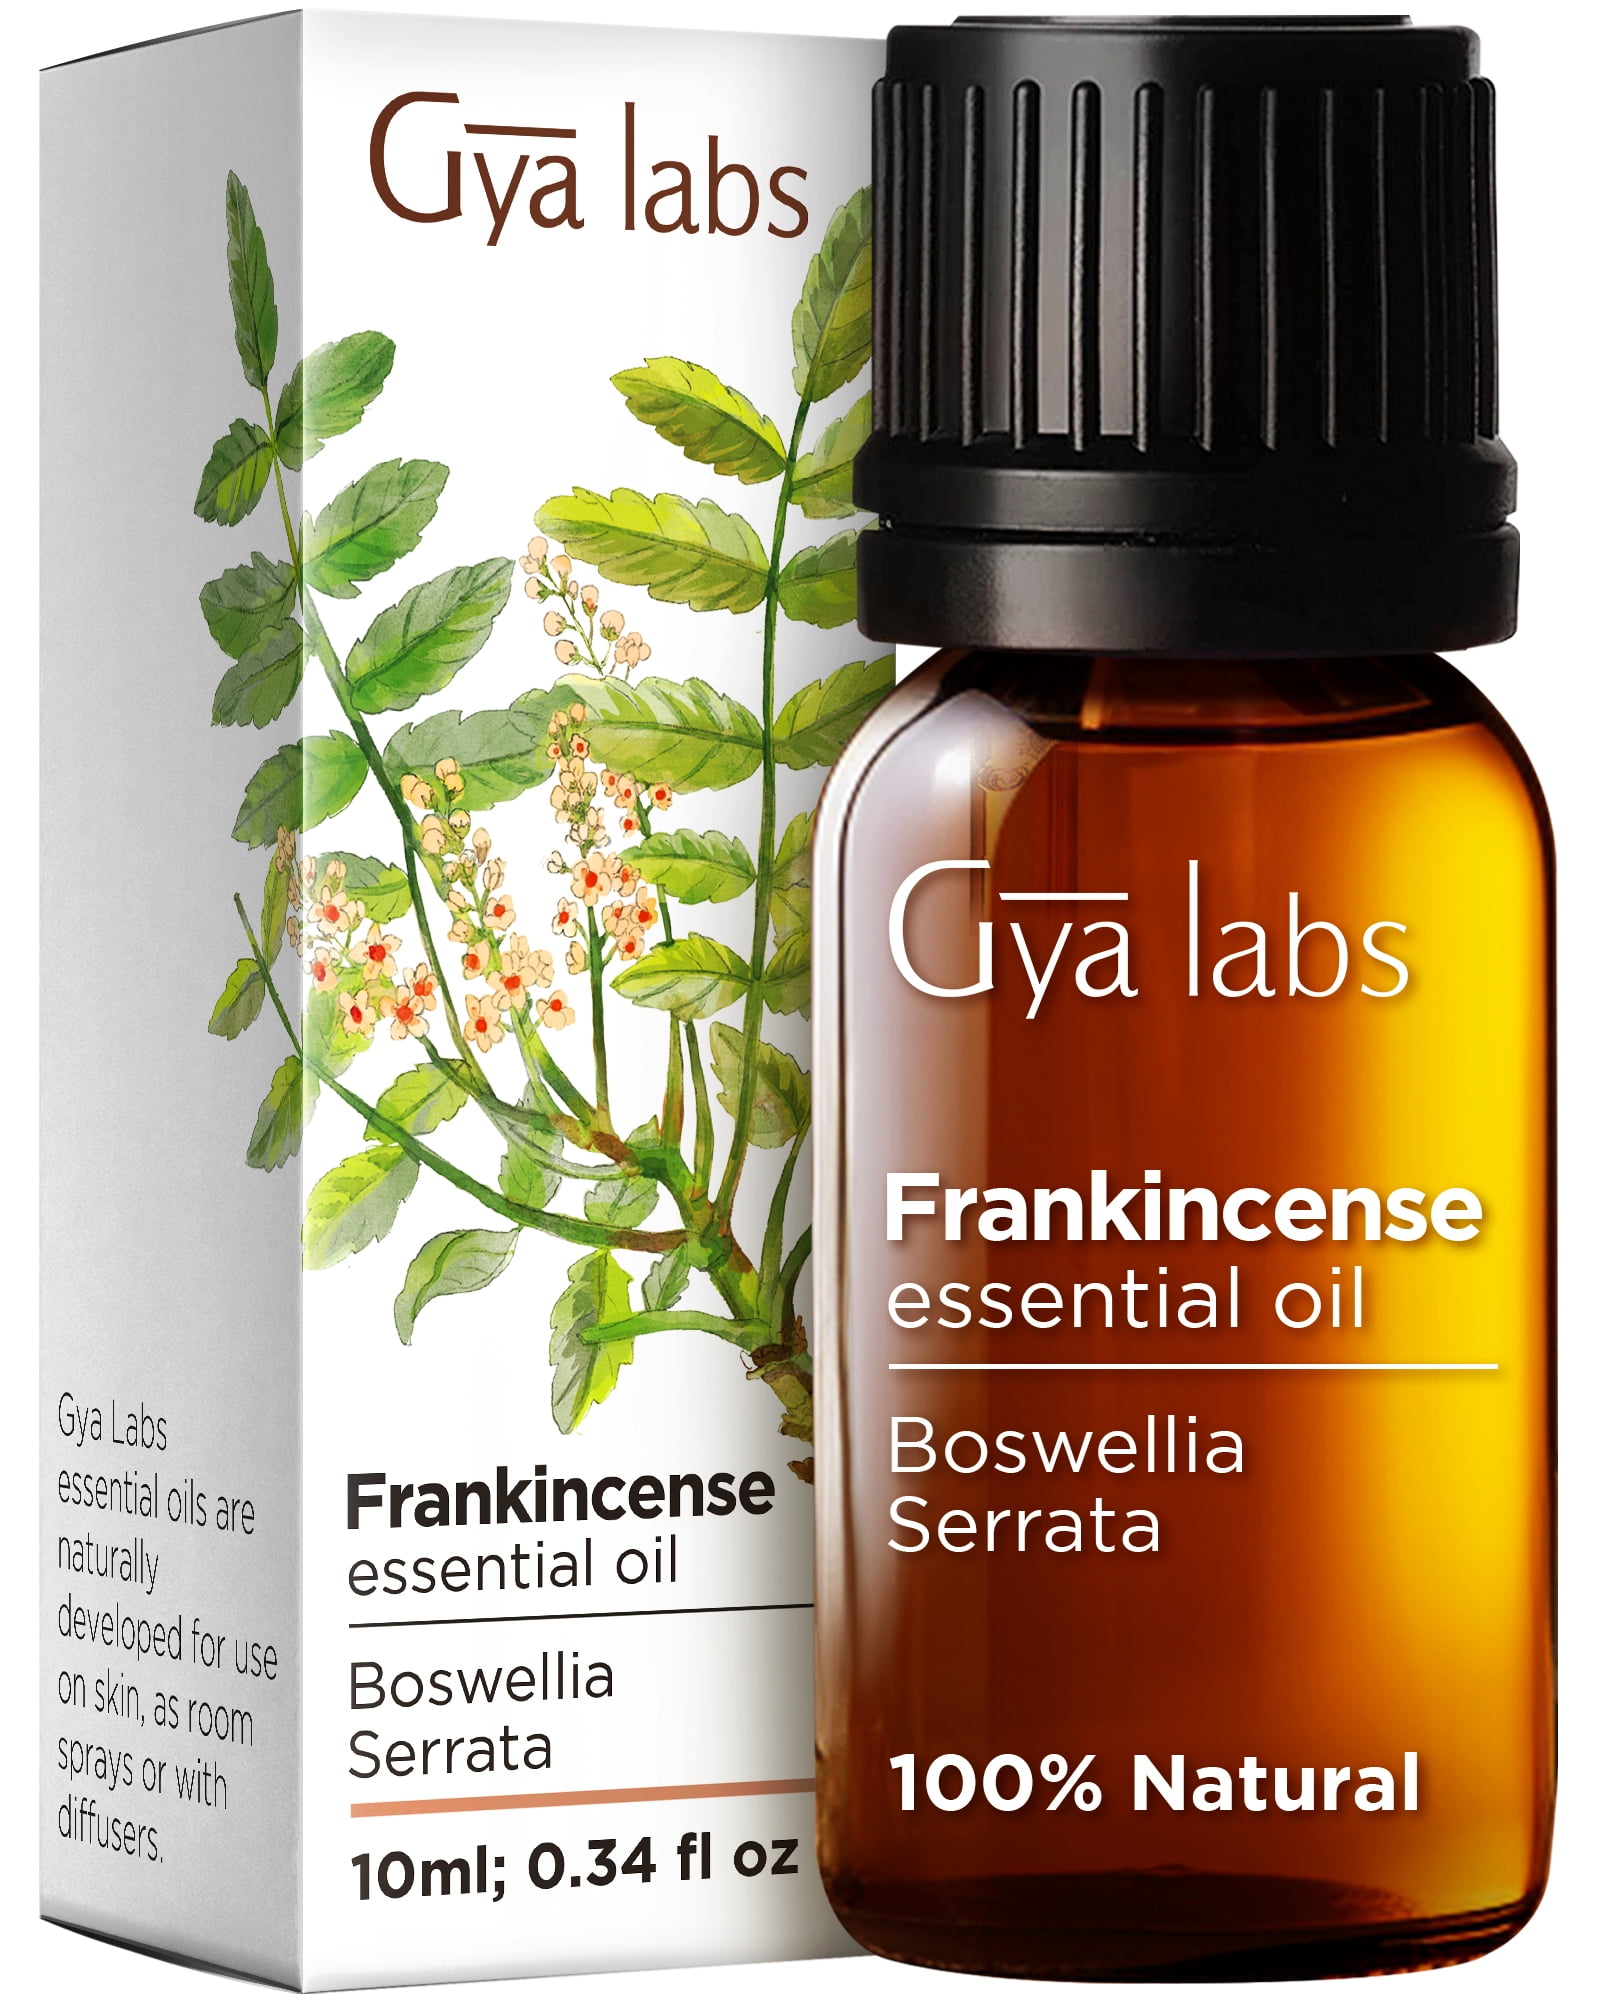 Gya Labs Frankincense Essential Oil for Well-being - Frankincense Oil for  Skin, Frankincense Oil for Face & Diffuser, 0.34 fl oz